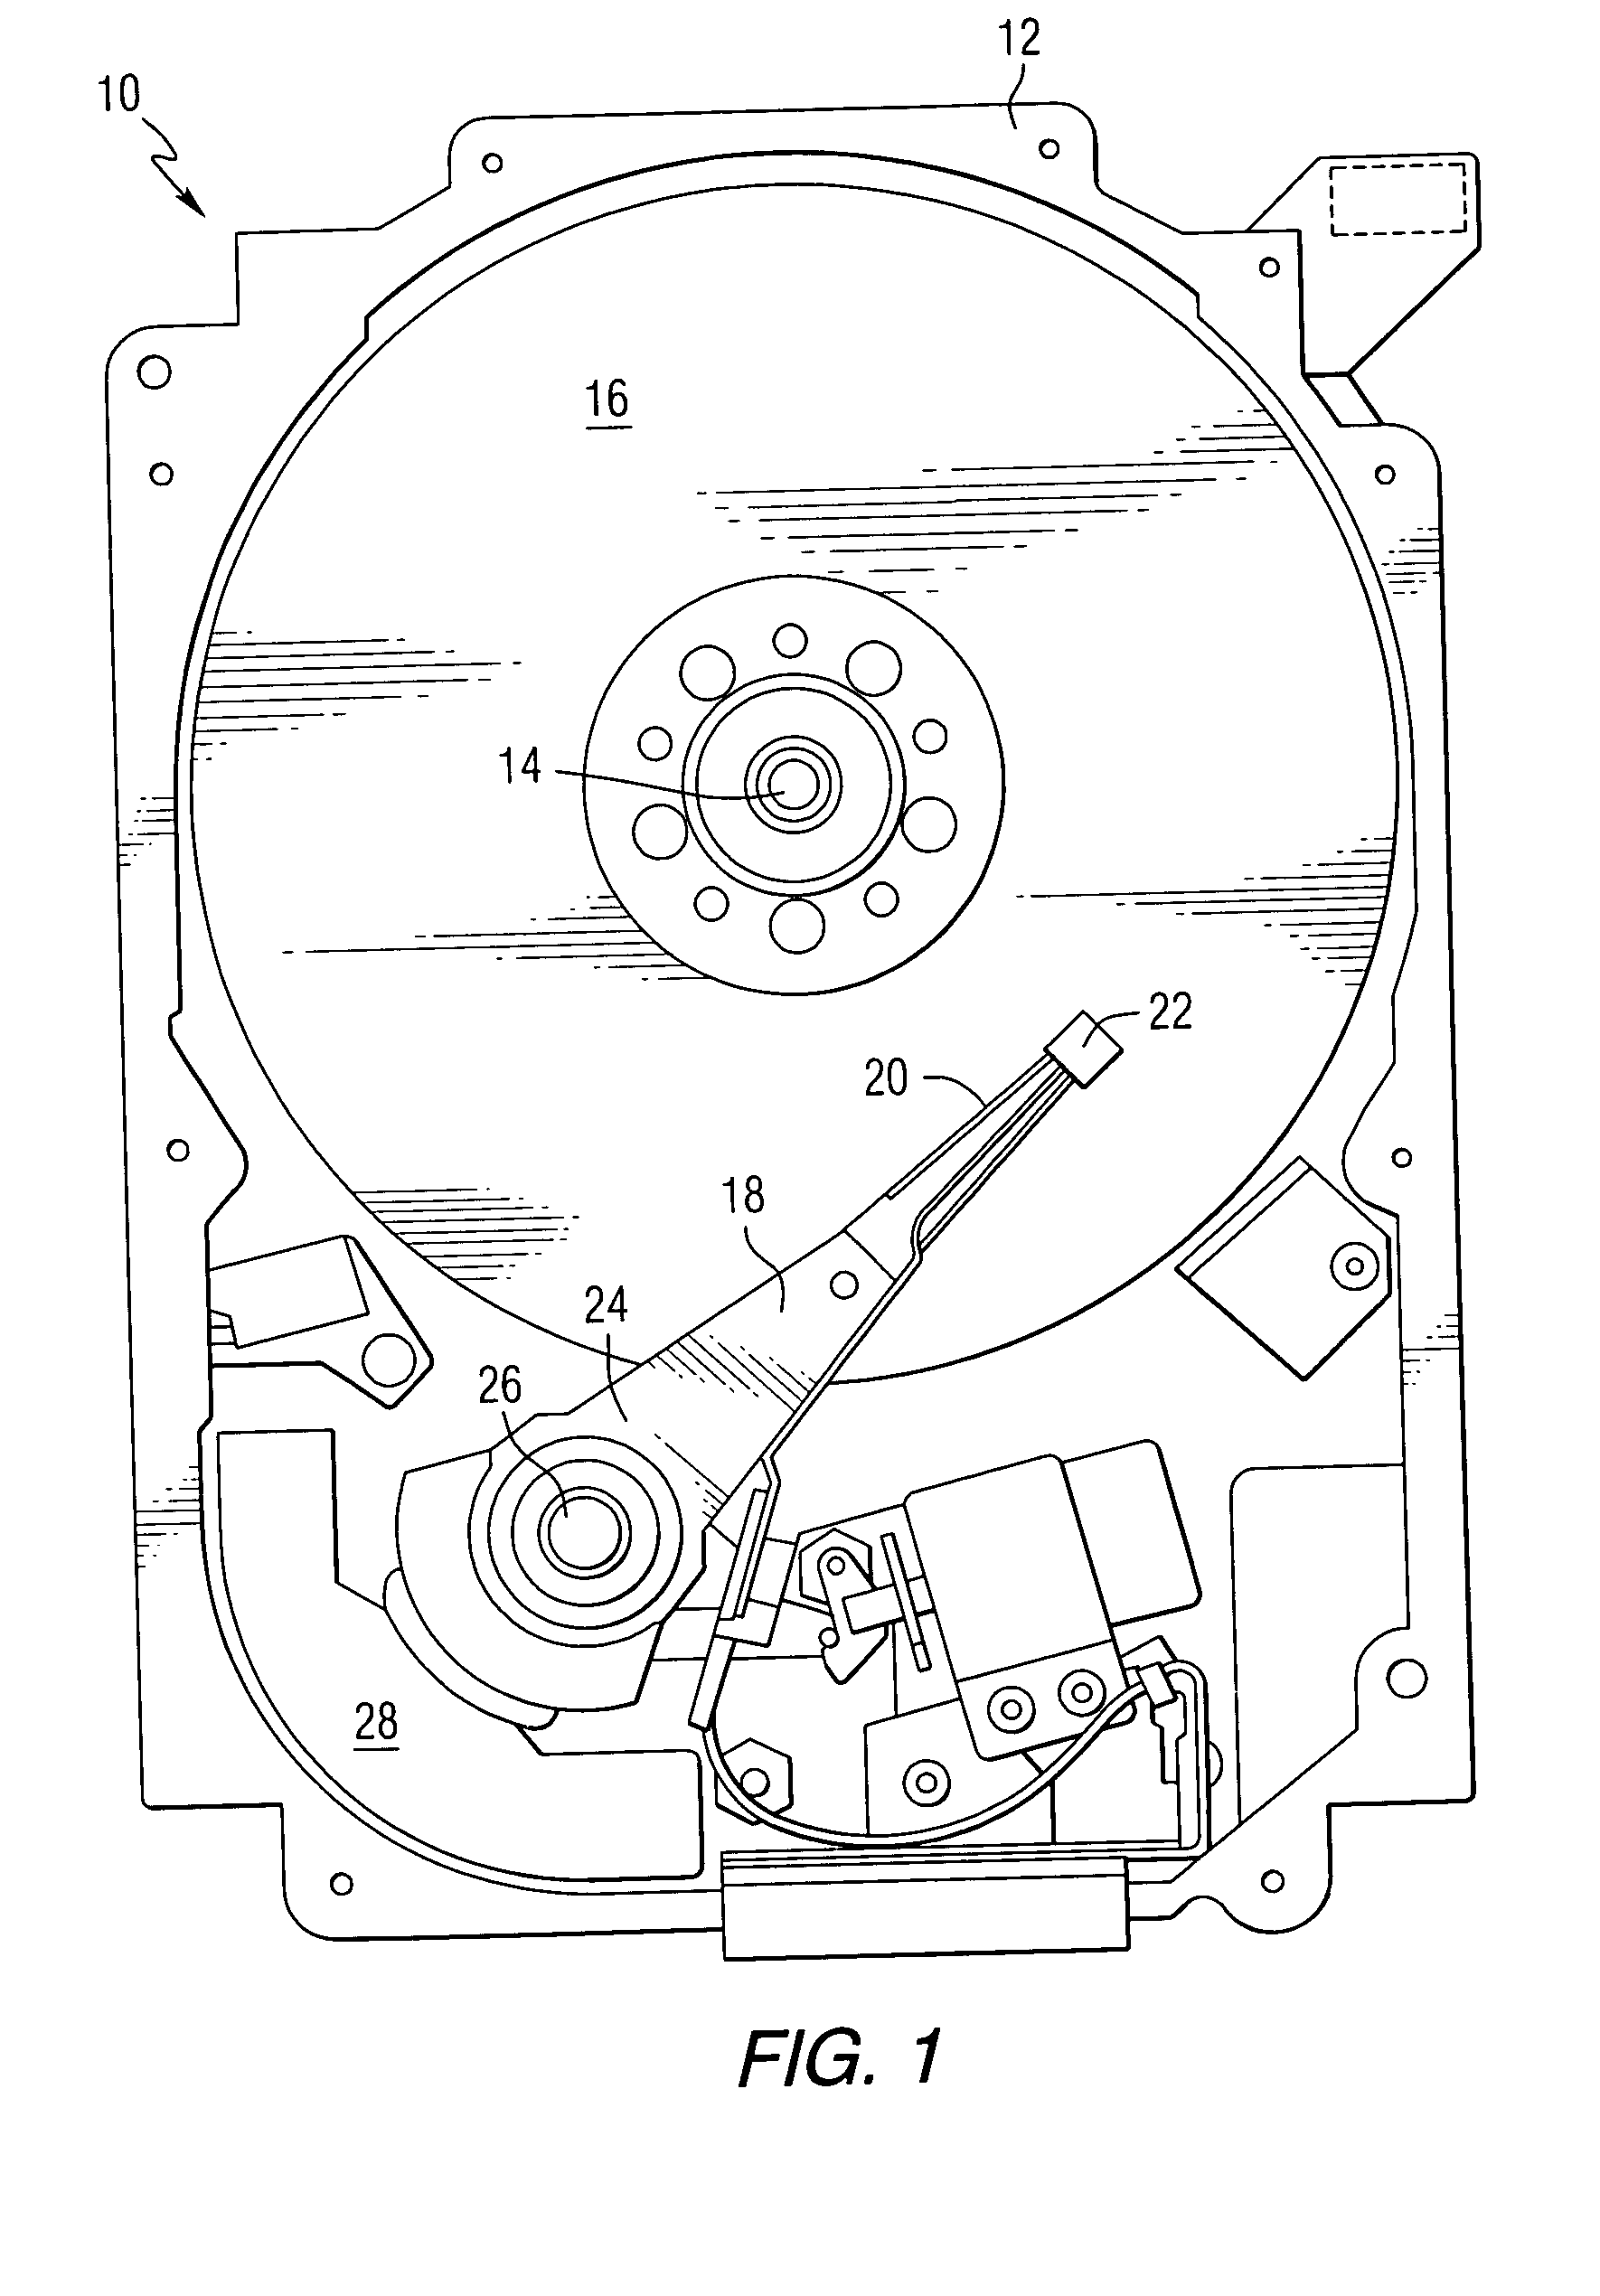 Heat assisted magnetic recording head and method